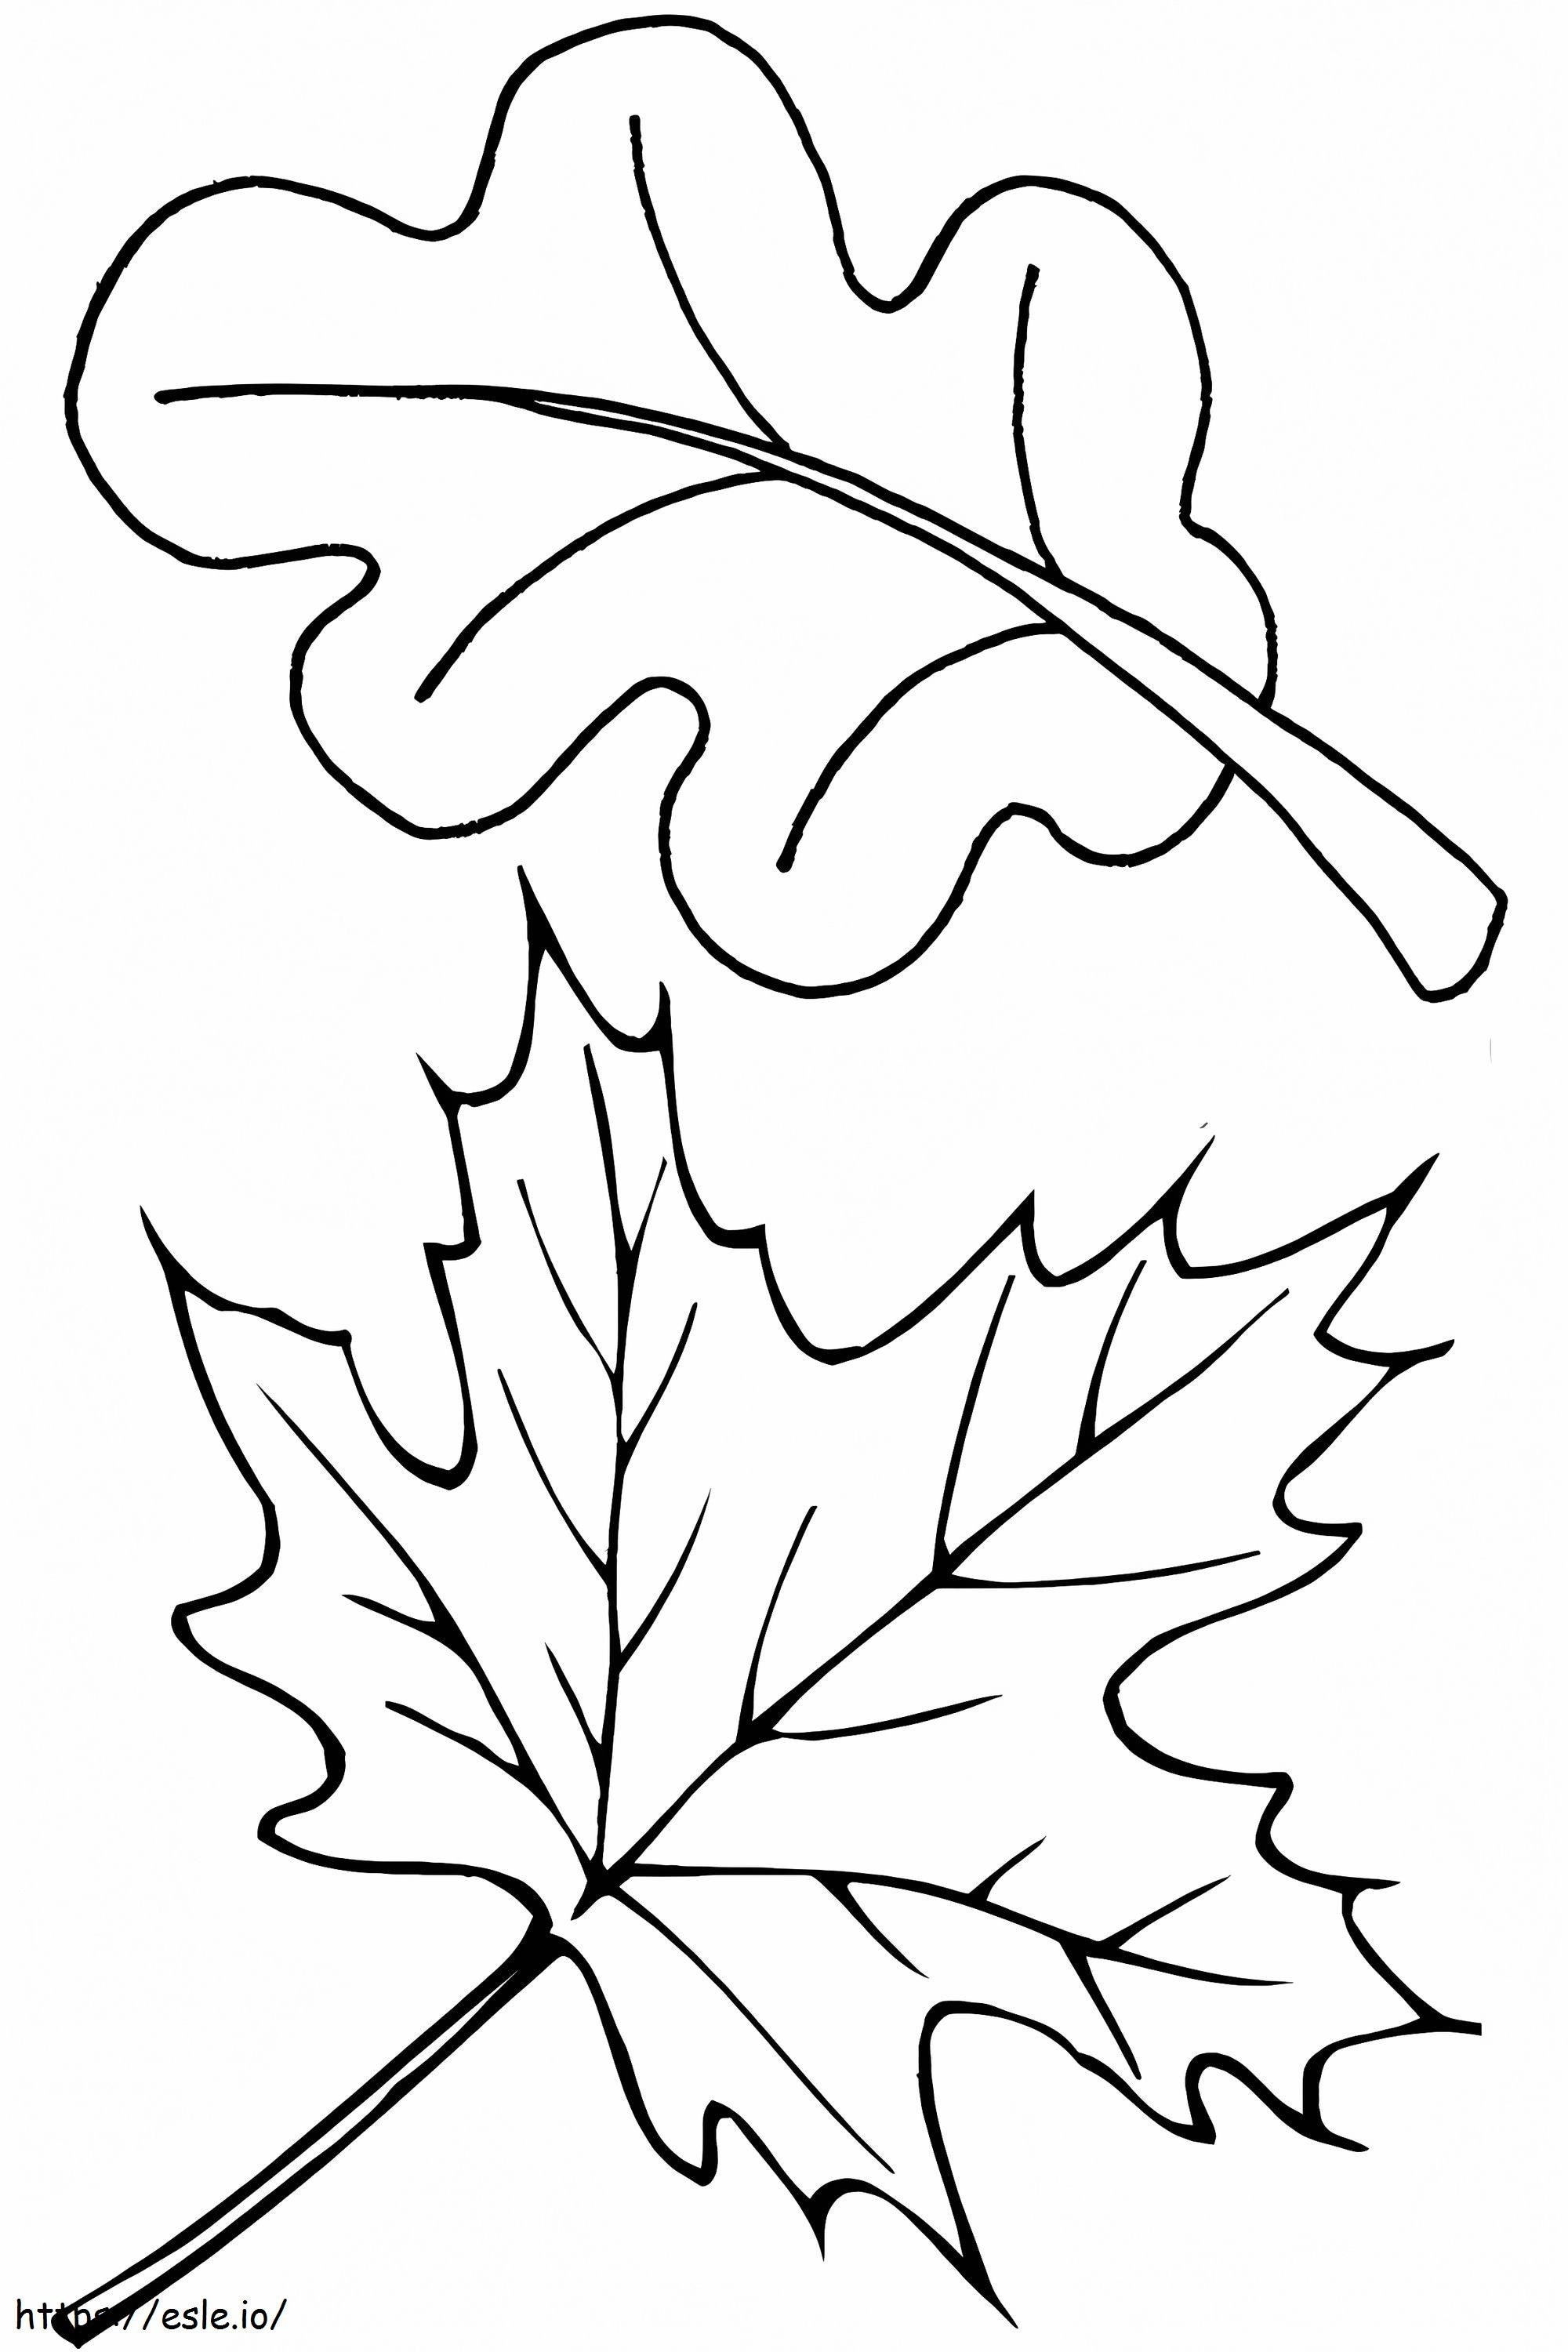 Two Autumn Leaves coloring page